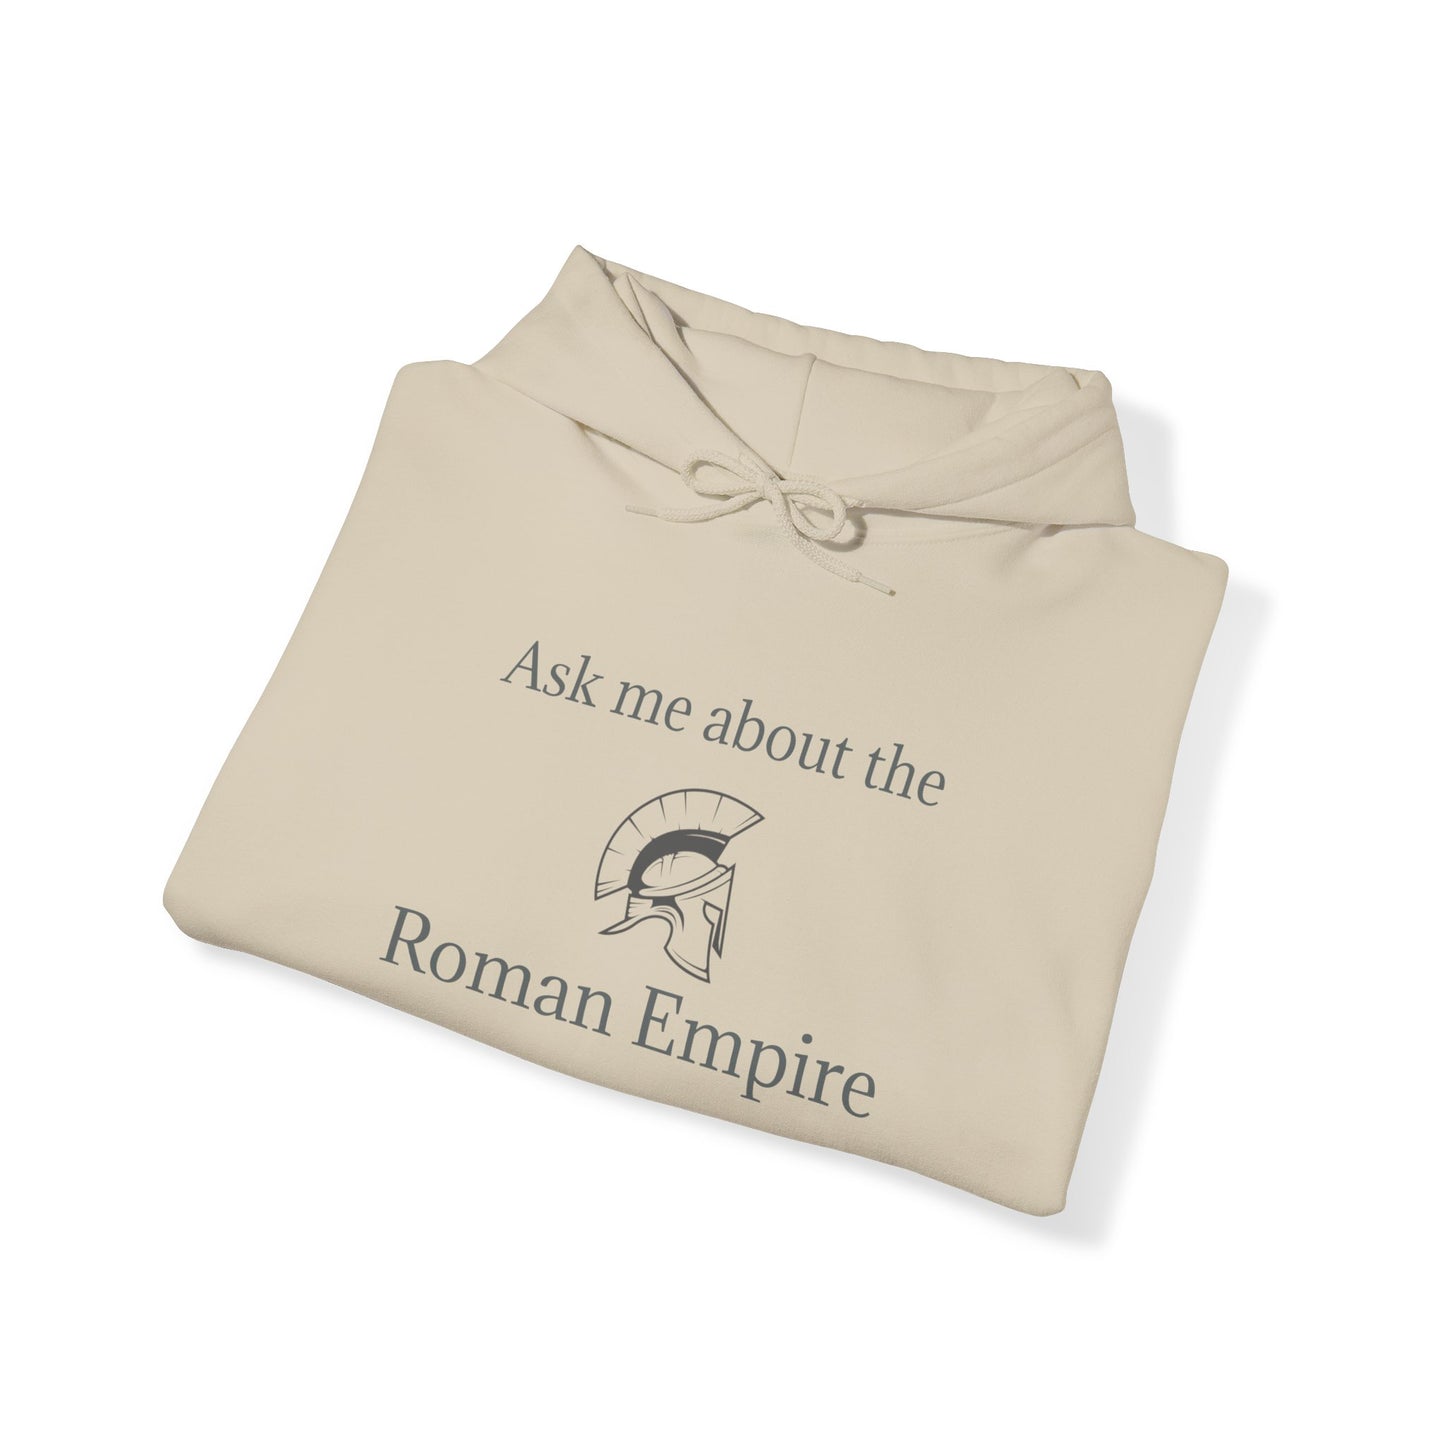 "Ask me about the Roman Empire" - Hoodie